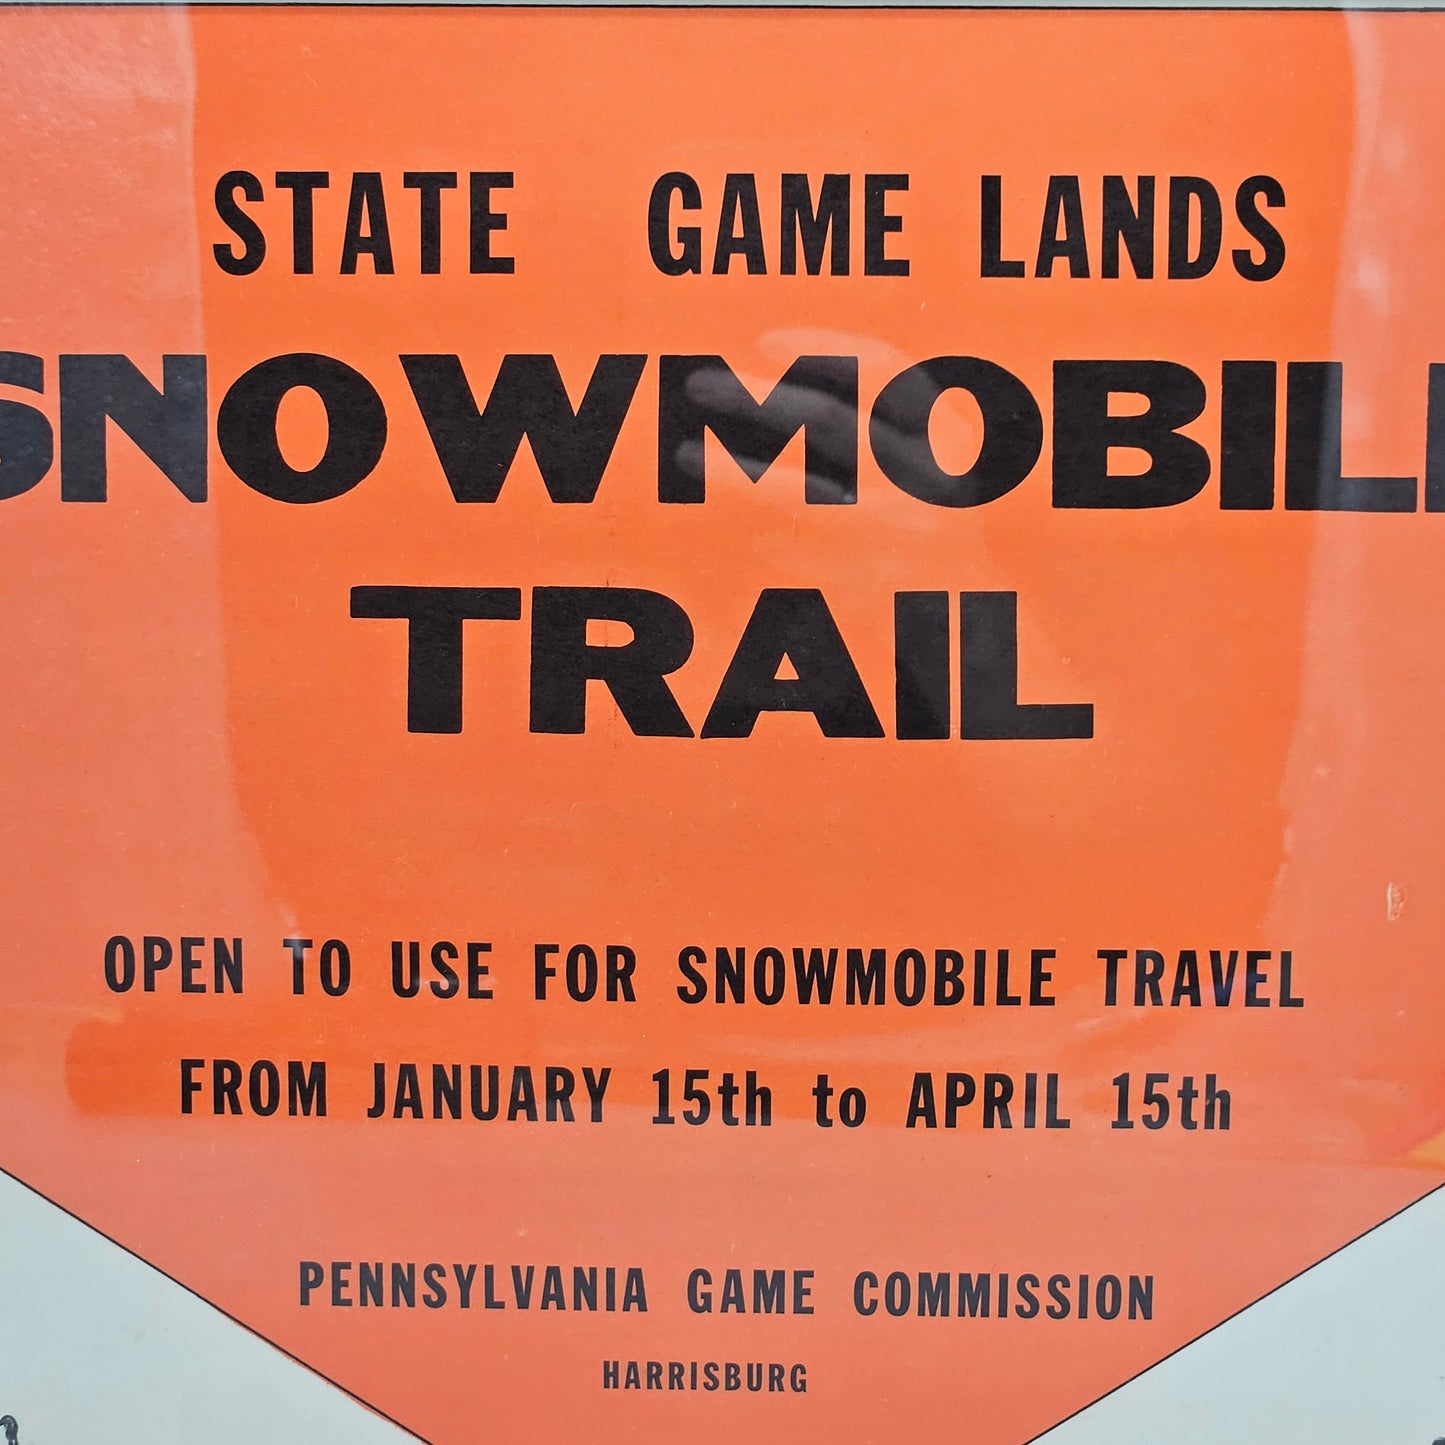 Vintage Framed Pennsylvania Game Commission Snowmobile Trail